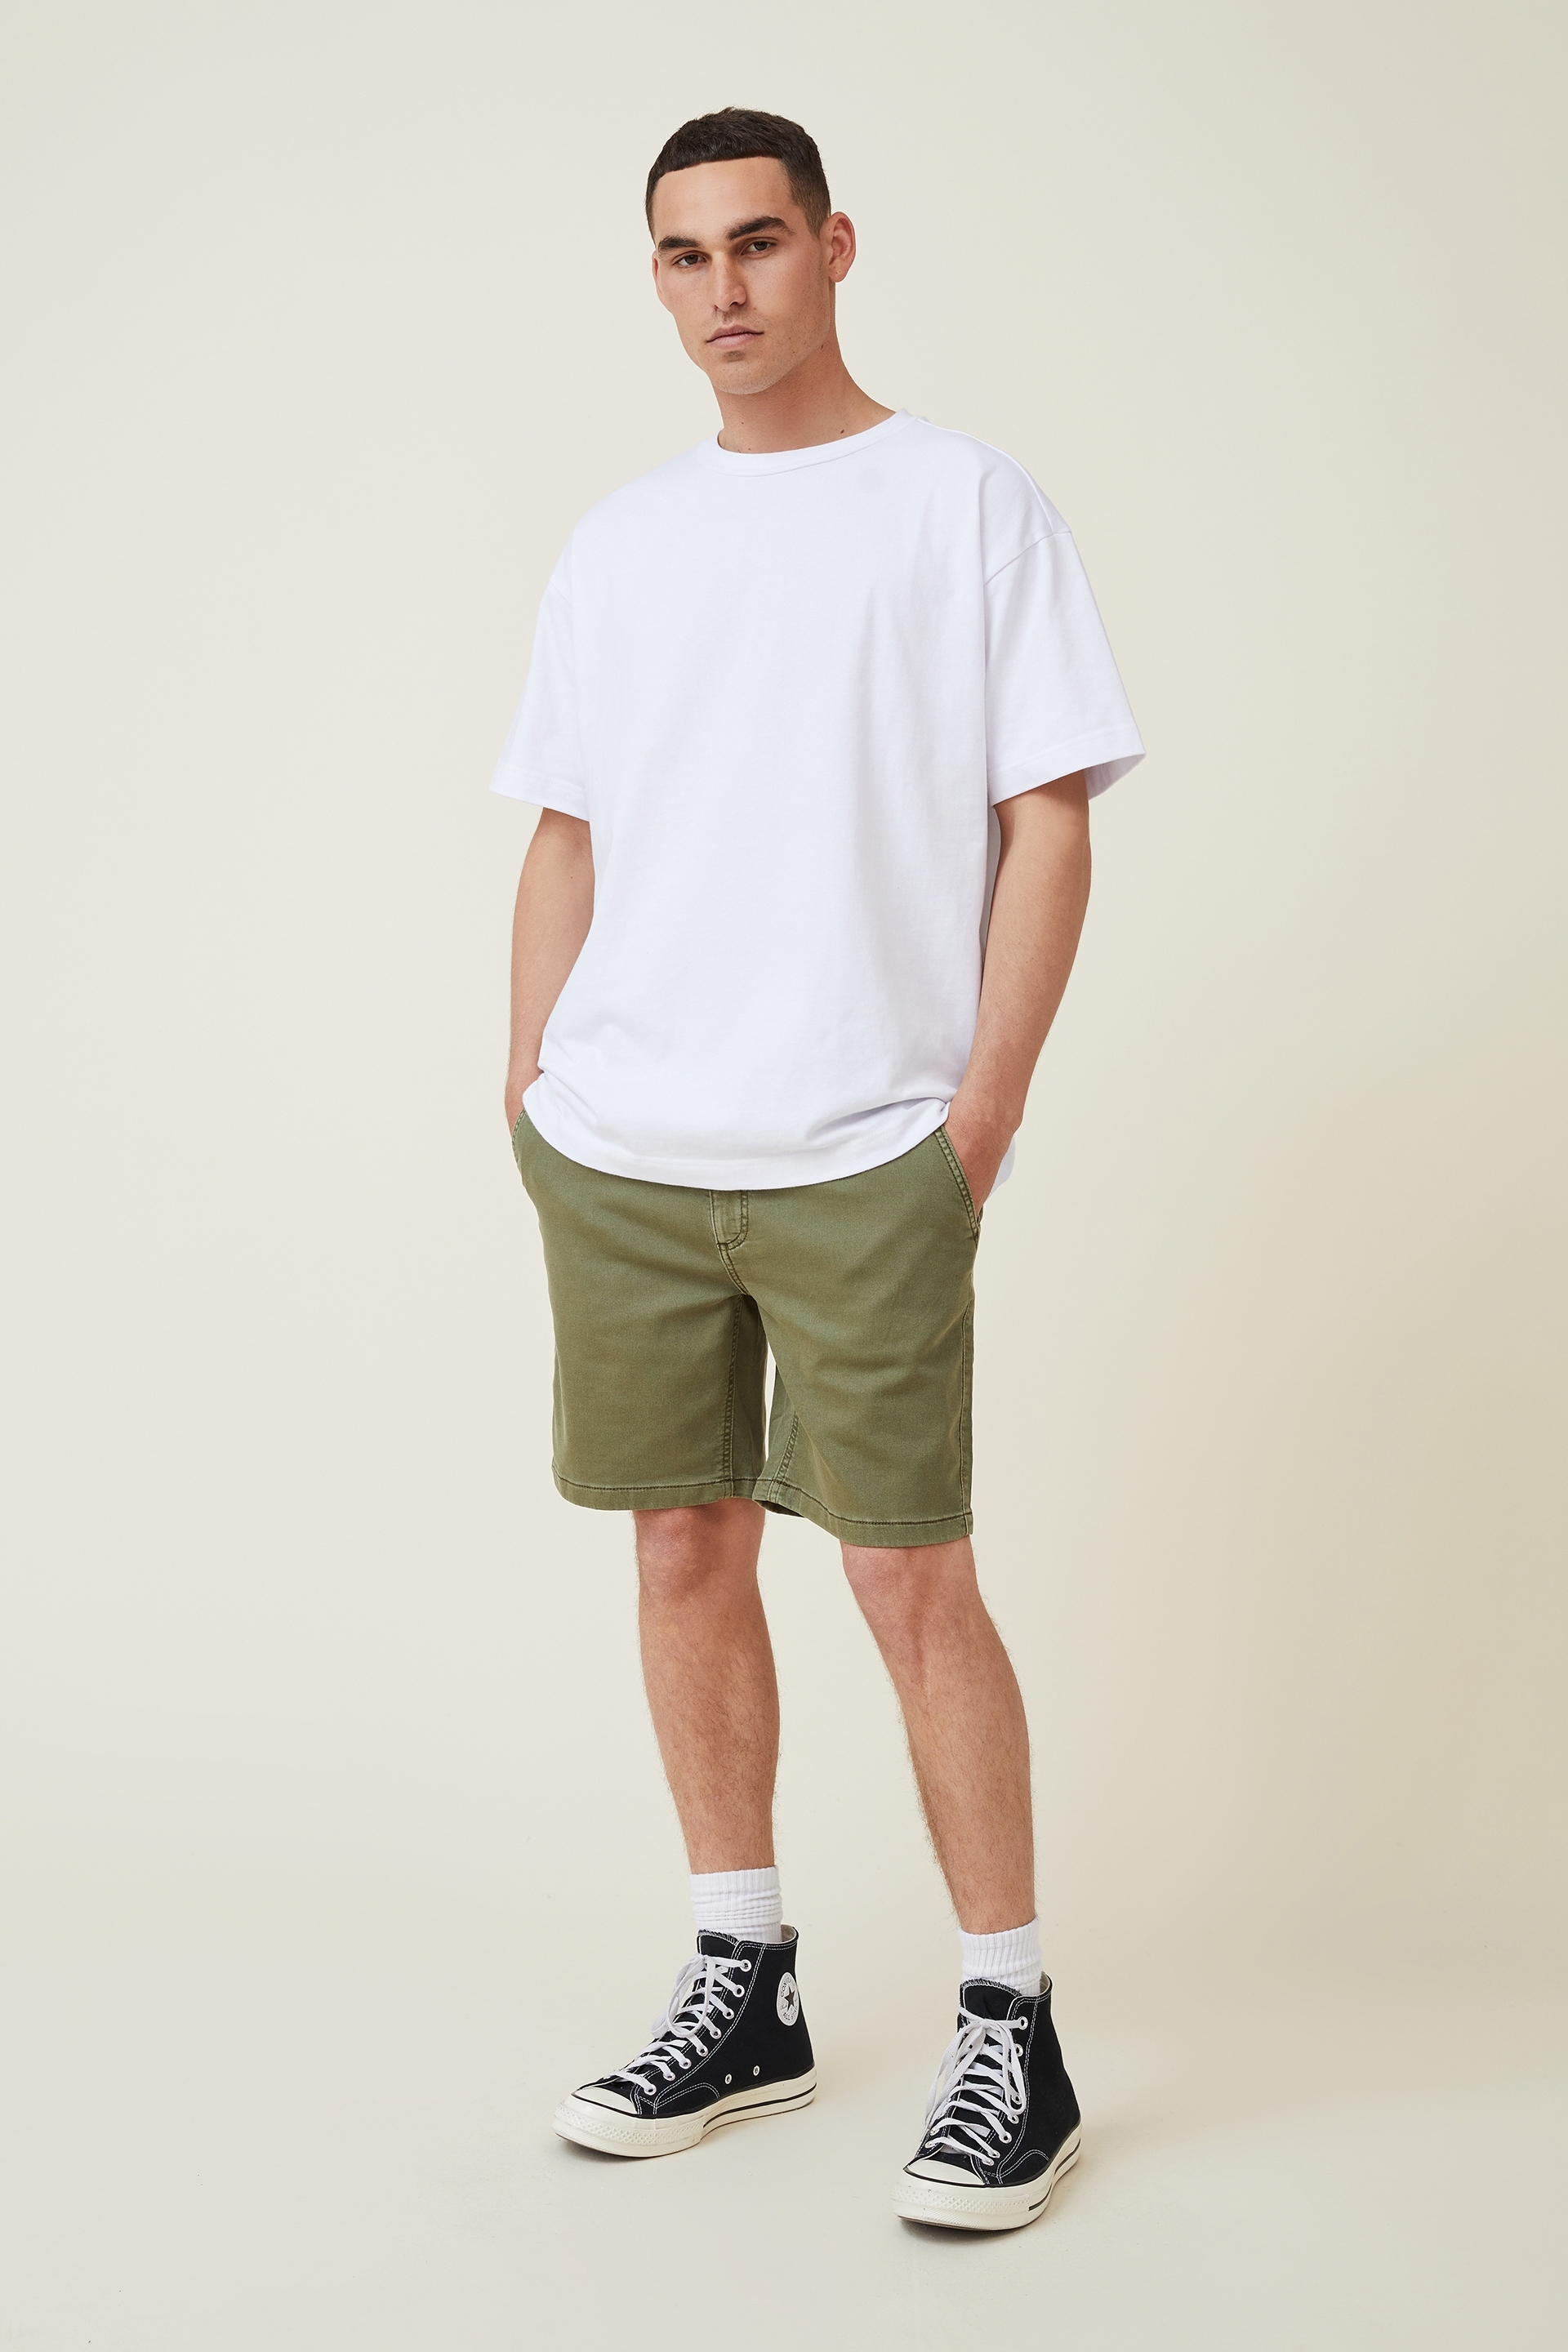 Cotton On Men - Corby Chino Short - Washed olive